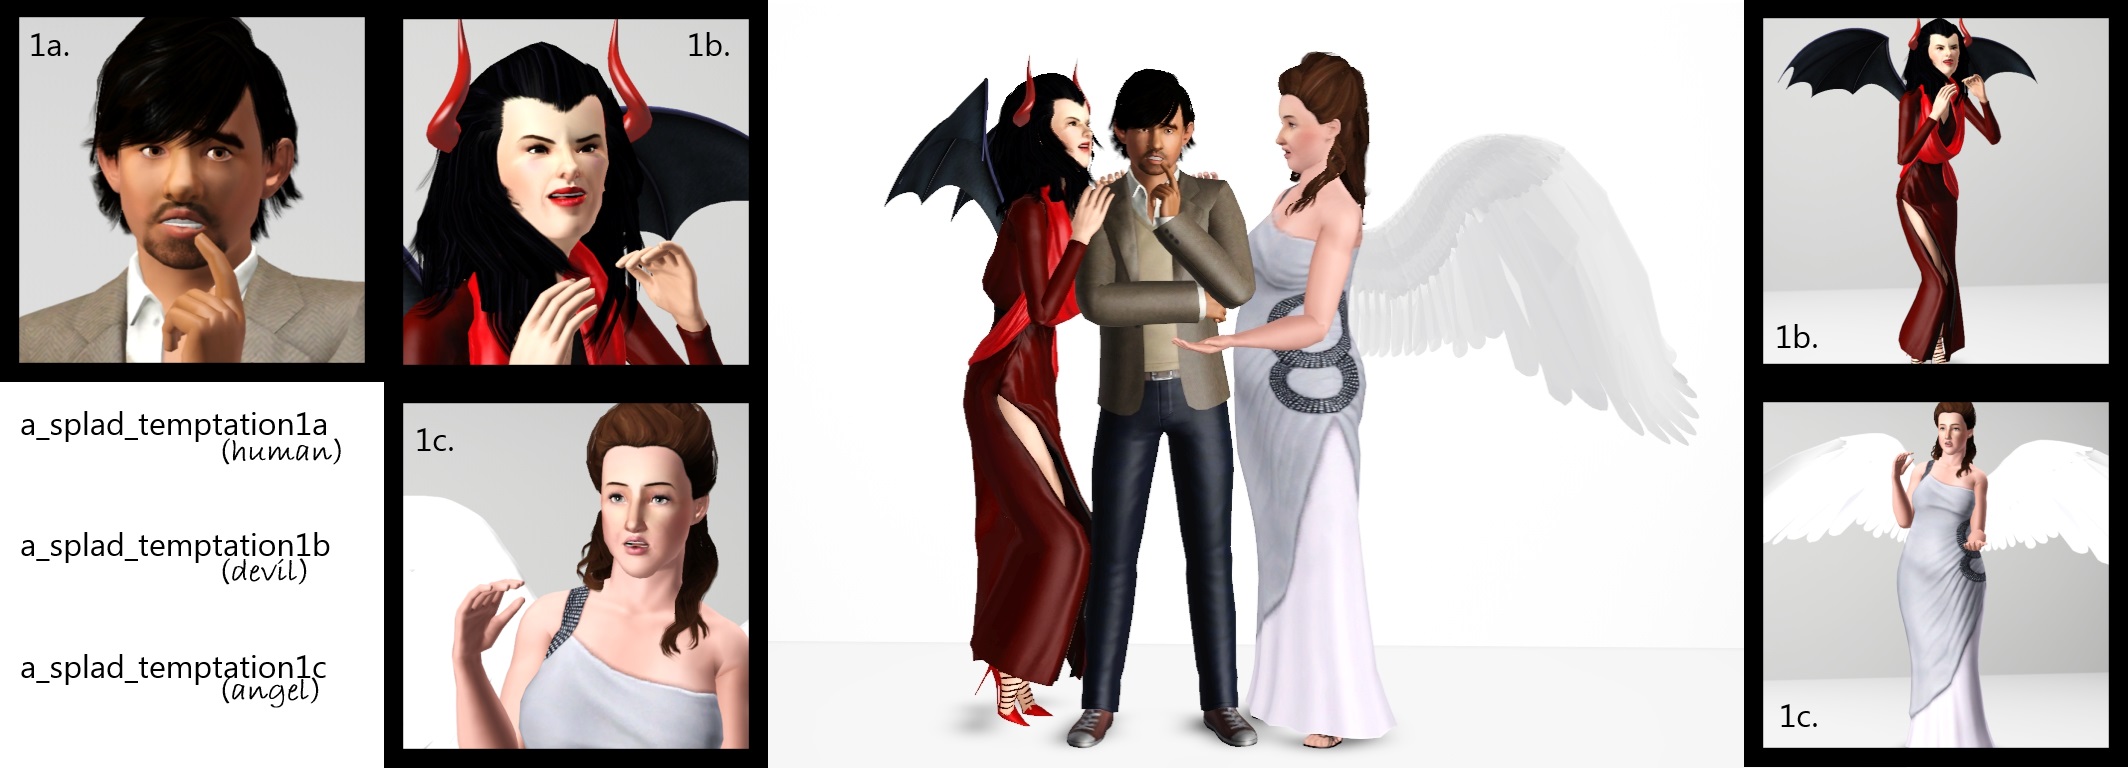 sims 4 angel and devil mod